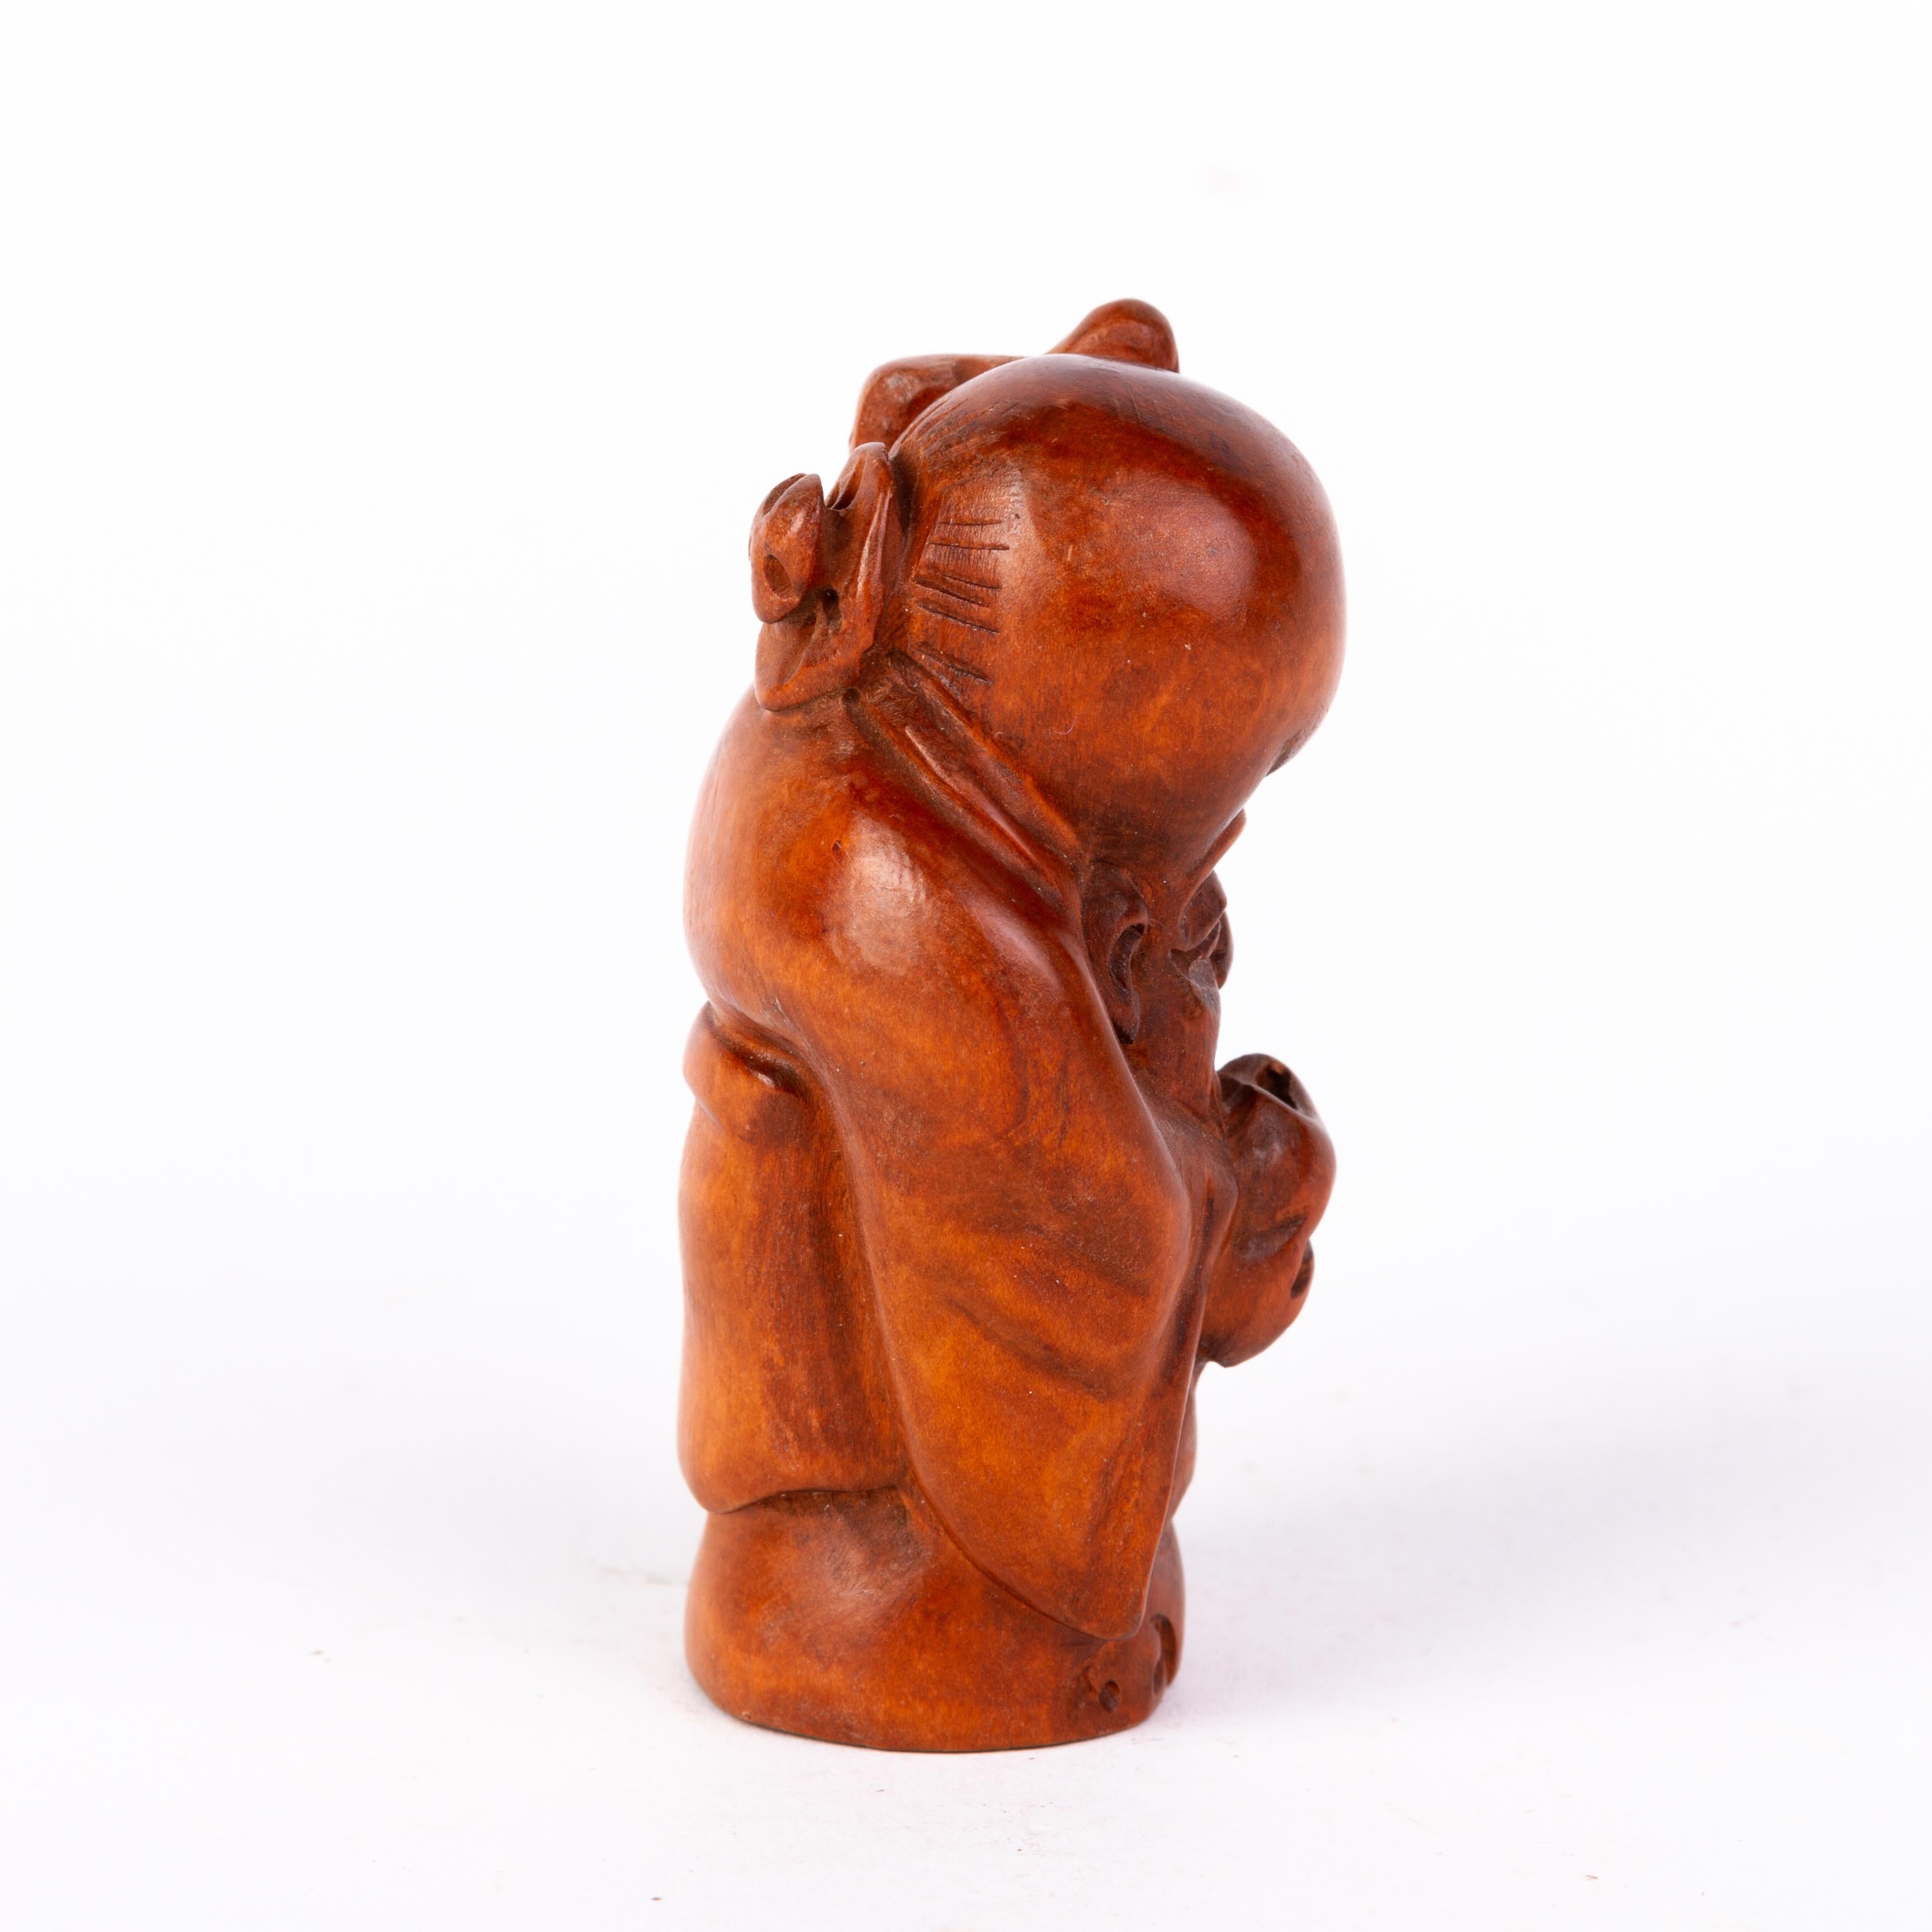 Signed Japanese Carved Boxwood Netsuke Inro Ojime
Very good condition.
From a private collection.
Free international shipping.